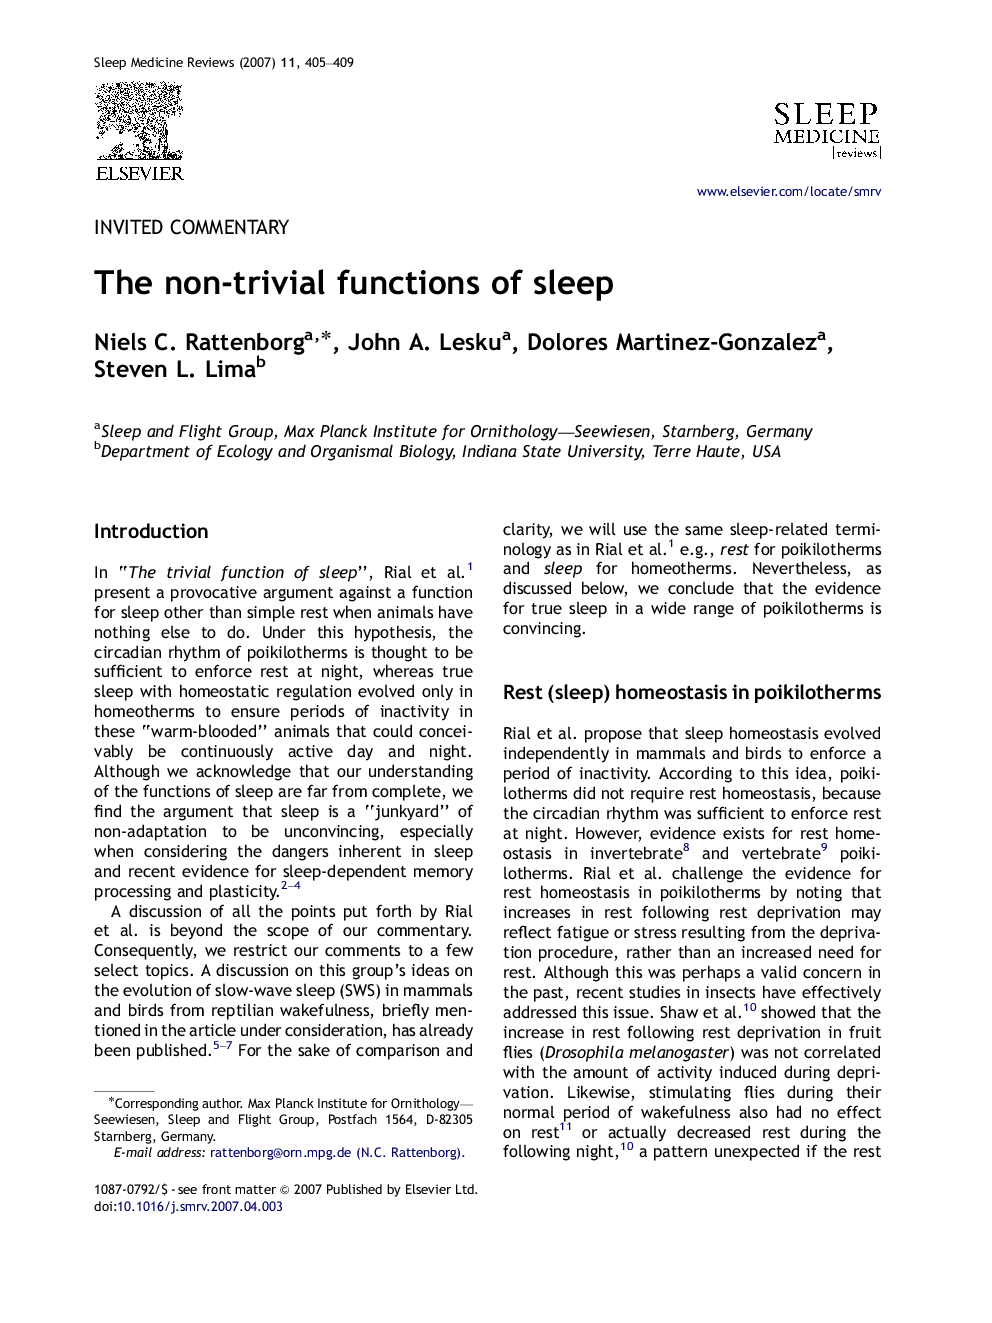 The non-trivial functions of sleep